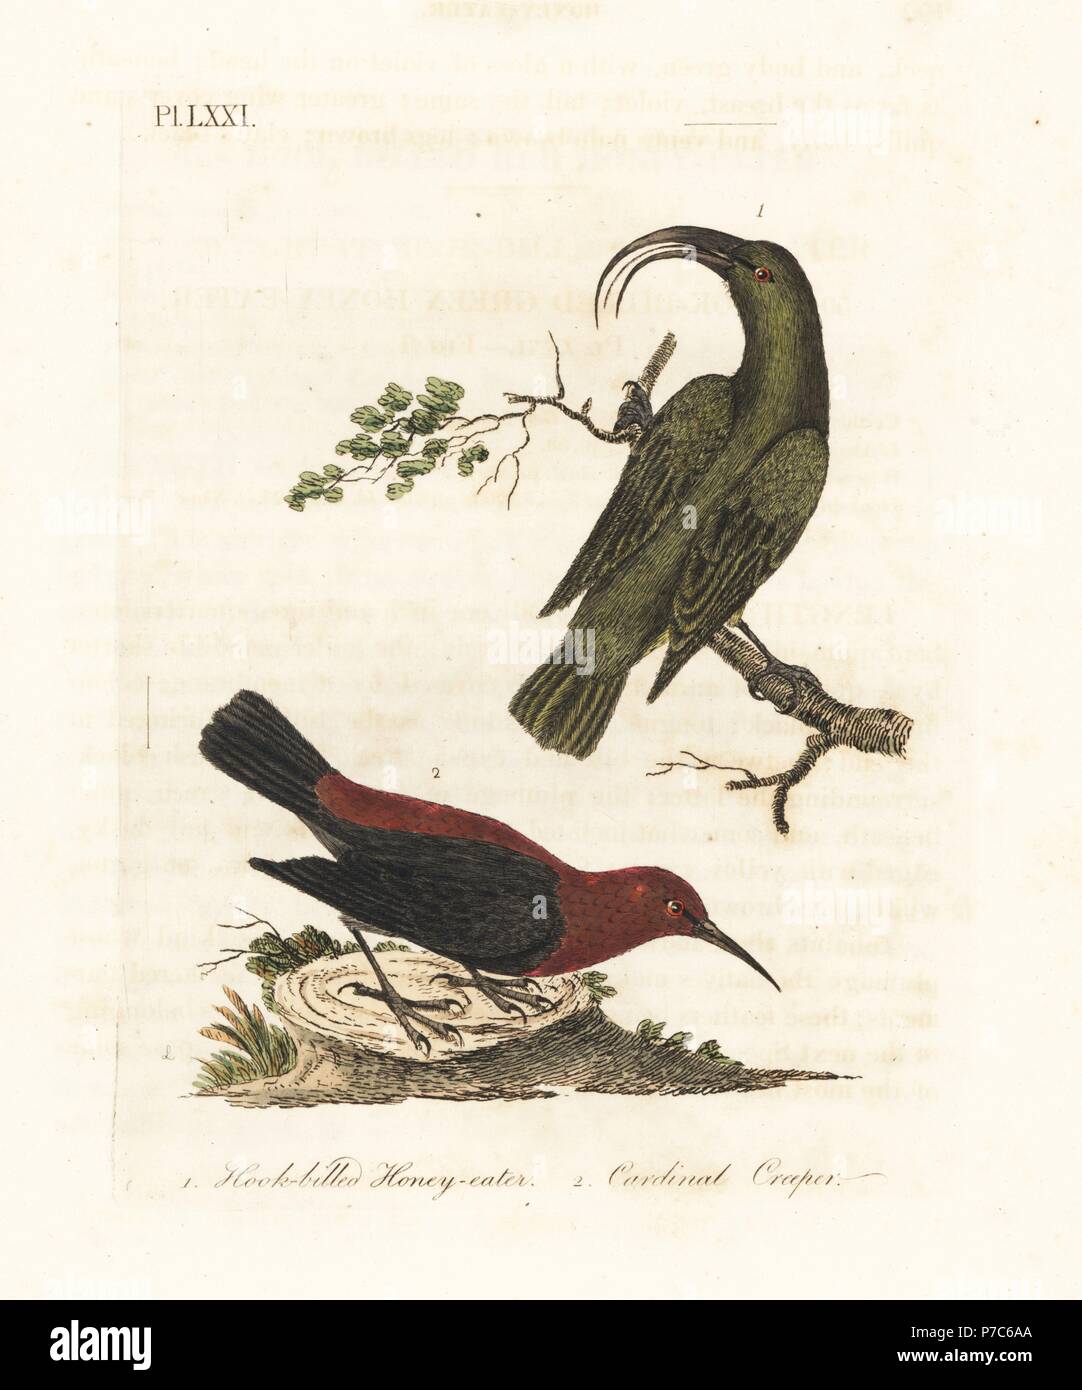 Lesser ?akialoa, Hemignathus obscurus (extinct) and cardinal myzomela, Myzomela cardinalis. (Hook-billed green honey-eater, Certhia obscura, native to Hawaii, and cardinal honey-eater, Certhia cardinalis, native to Tanna, Vanuatu.) Handcoloured copperplate drawn and engraved by John Latham from his own A General History of Birds, Winchester, 1822. Stock Photo